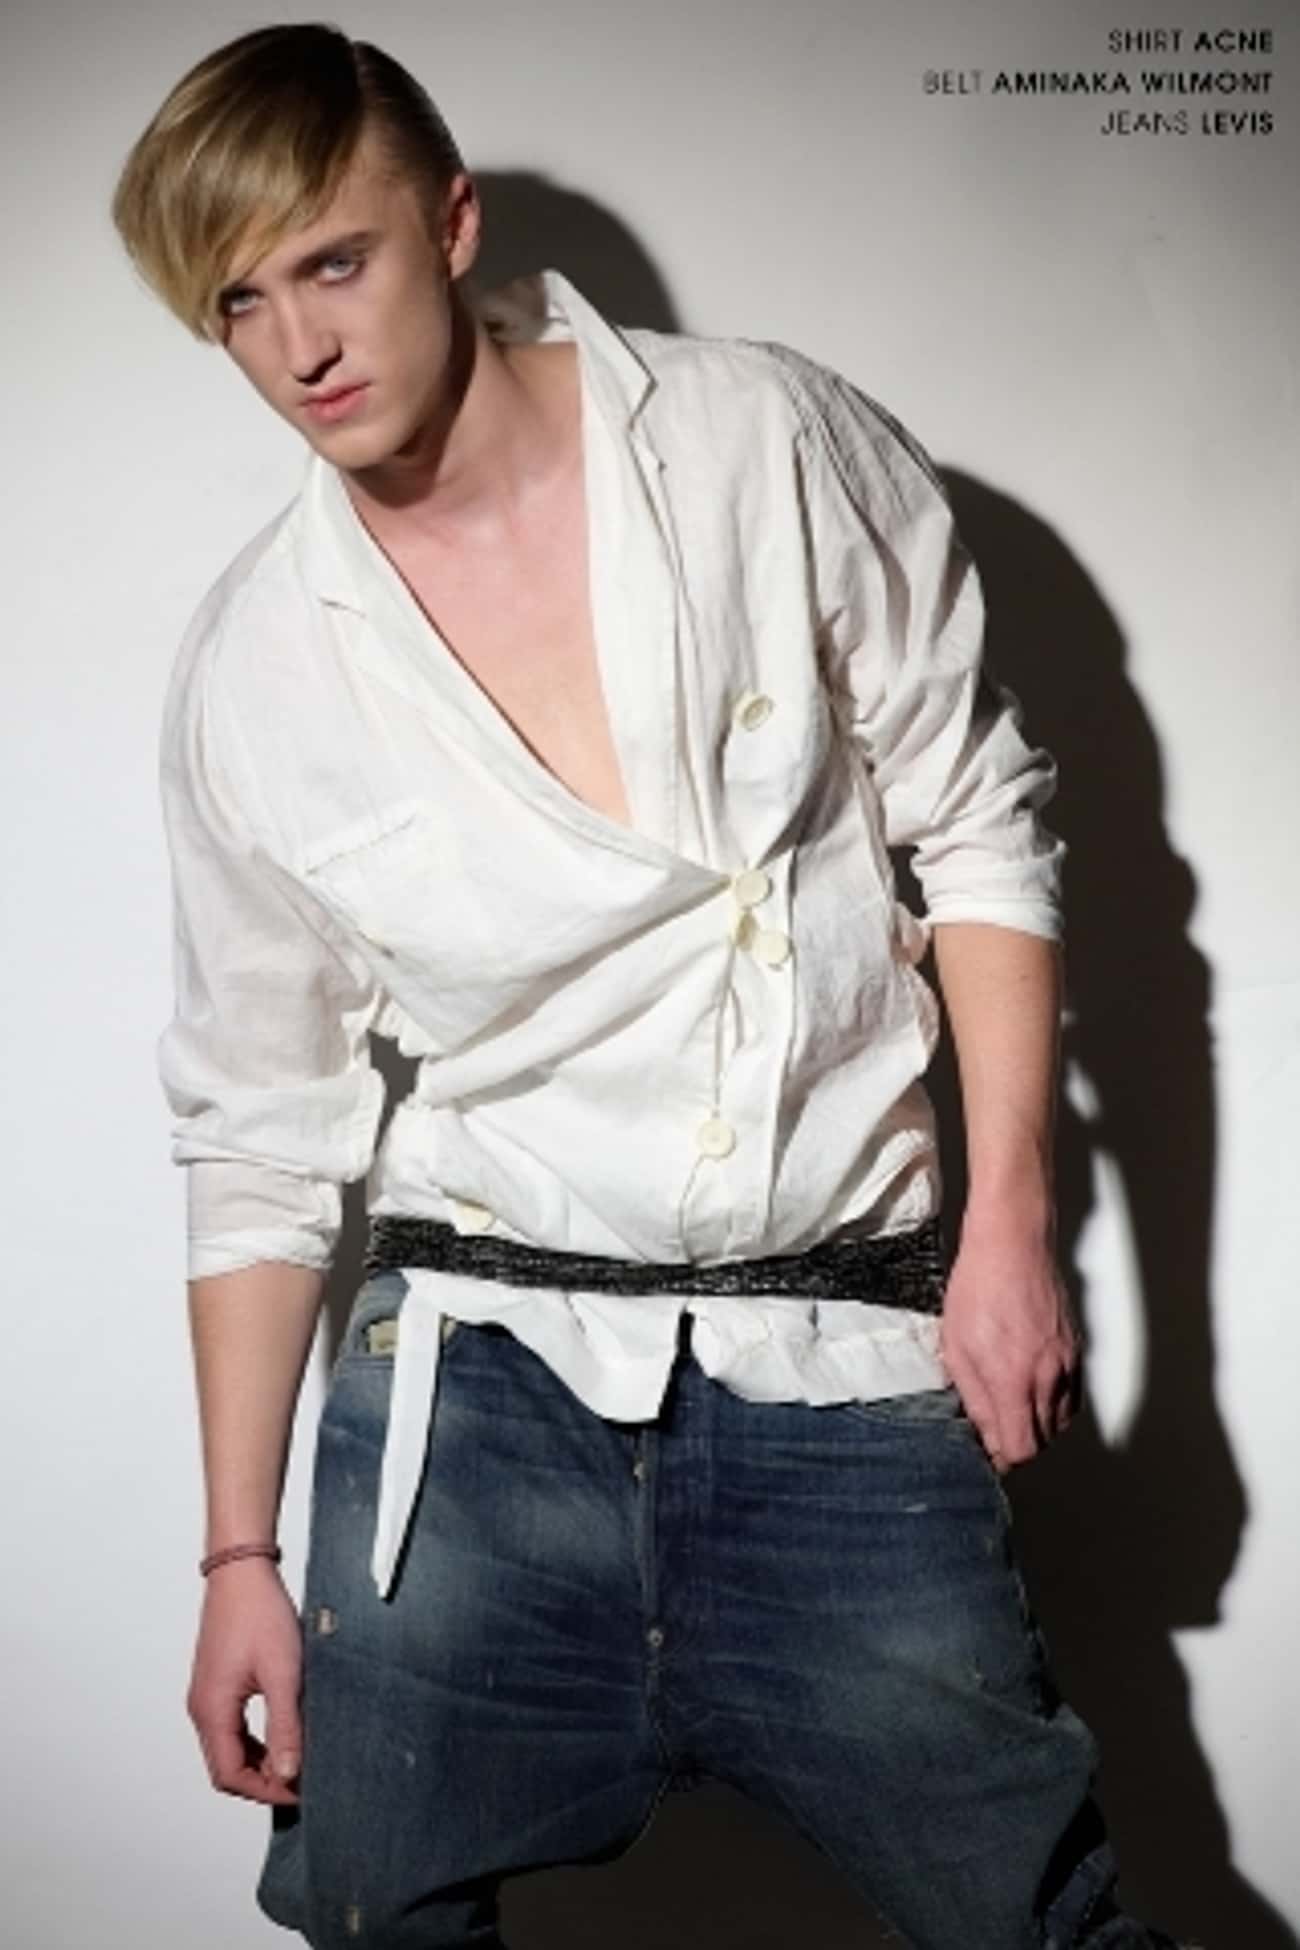 Tom Felton in Wrapped Shirt with Aminaka Belt and Levis Jeans